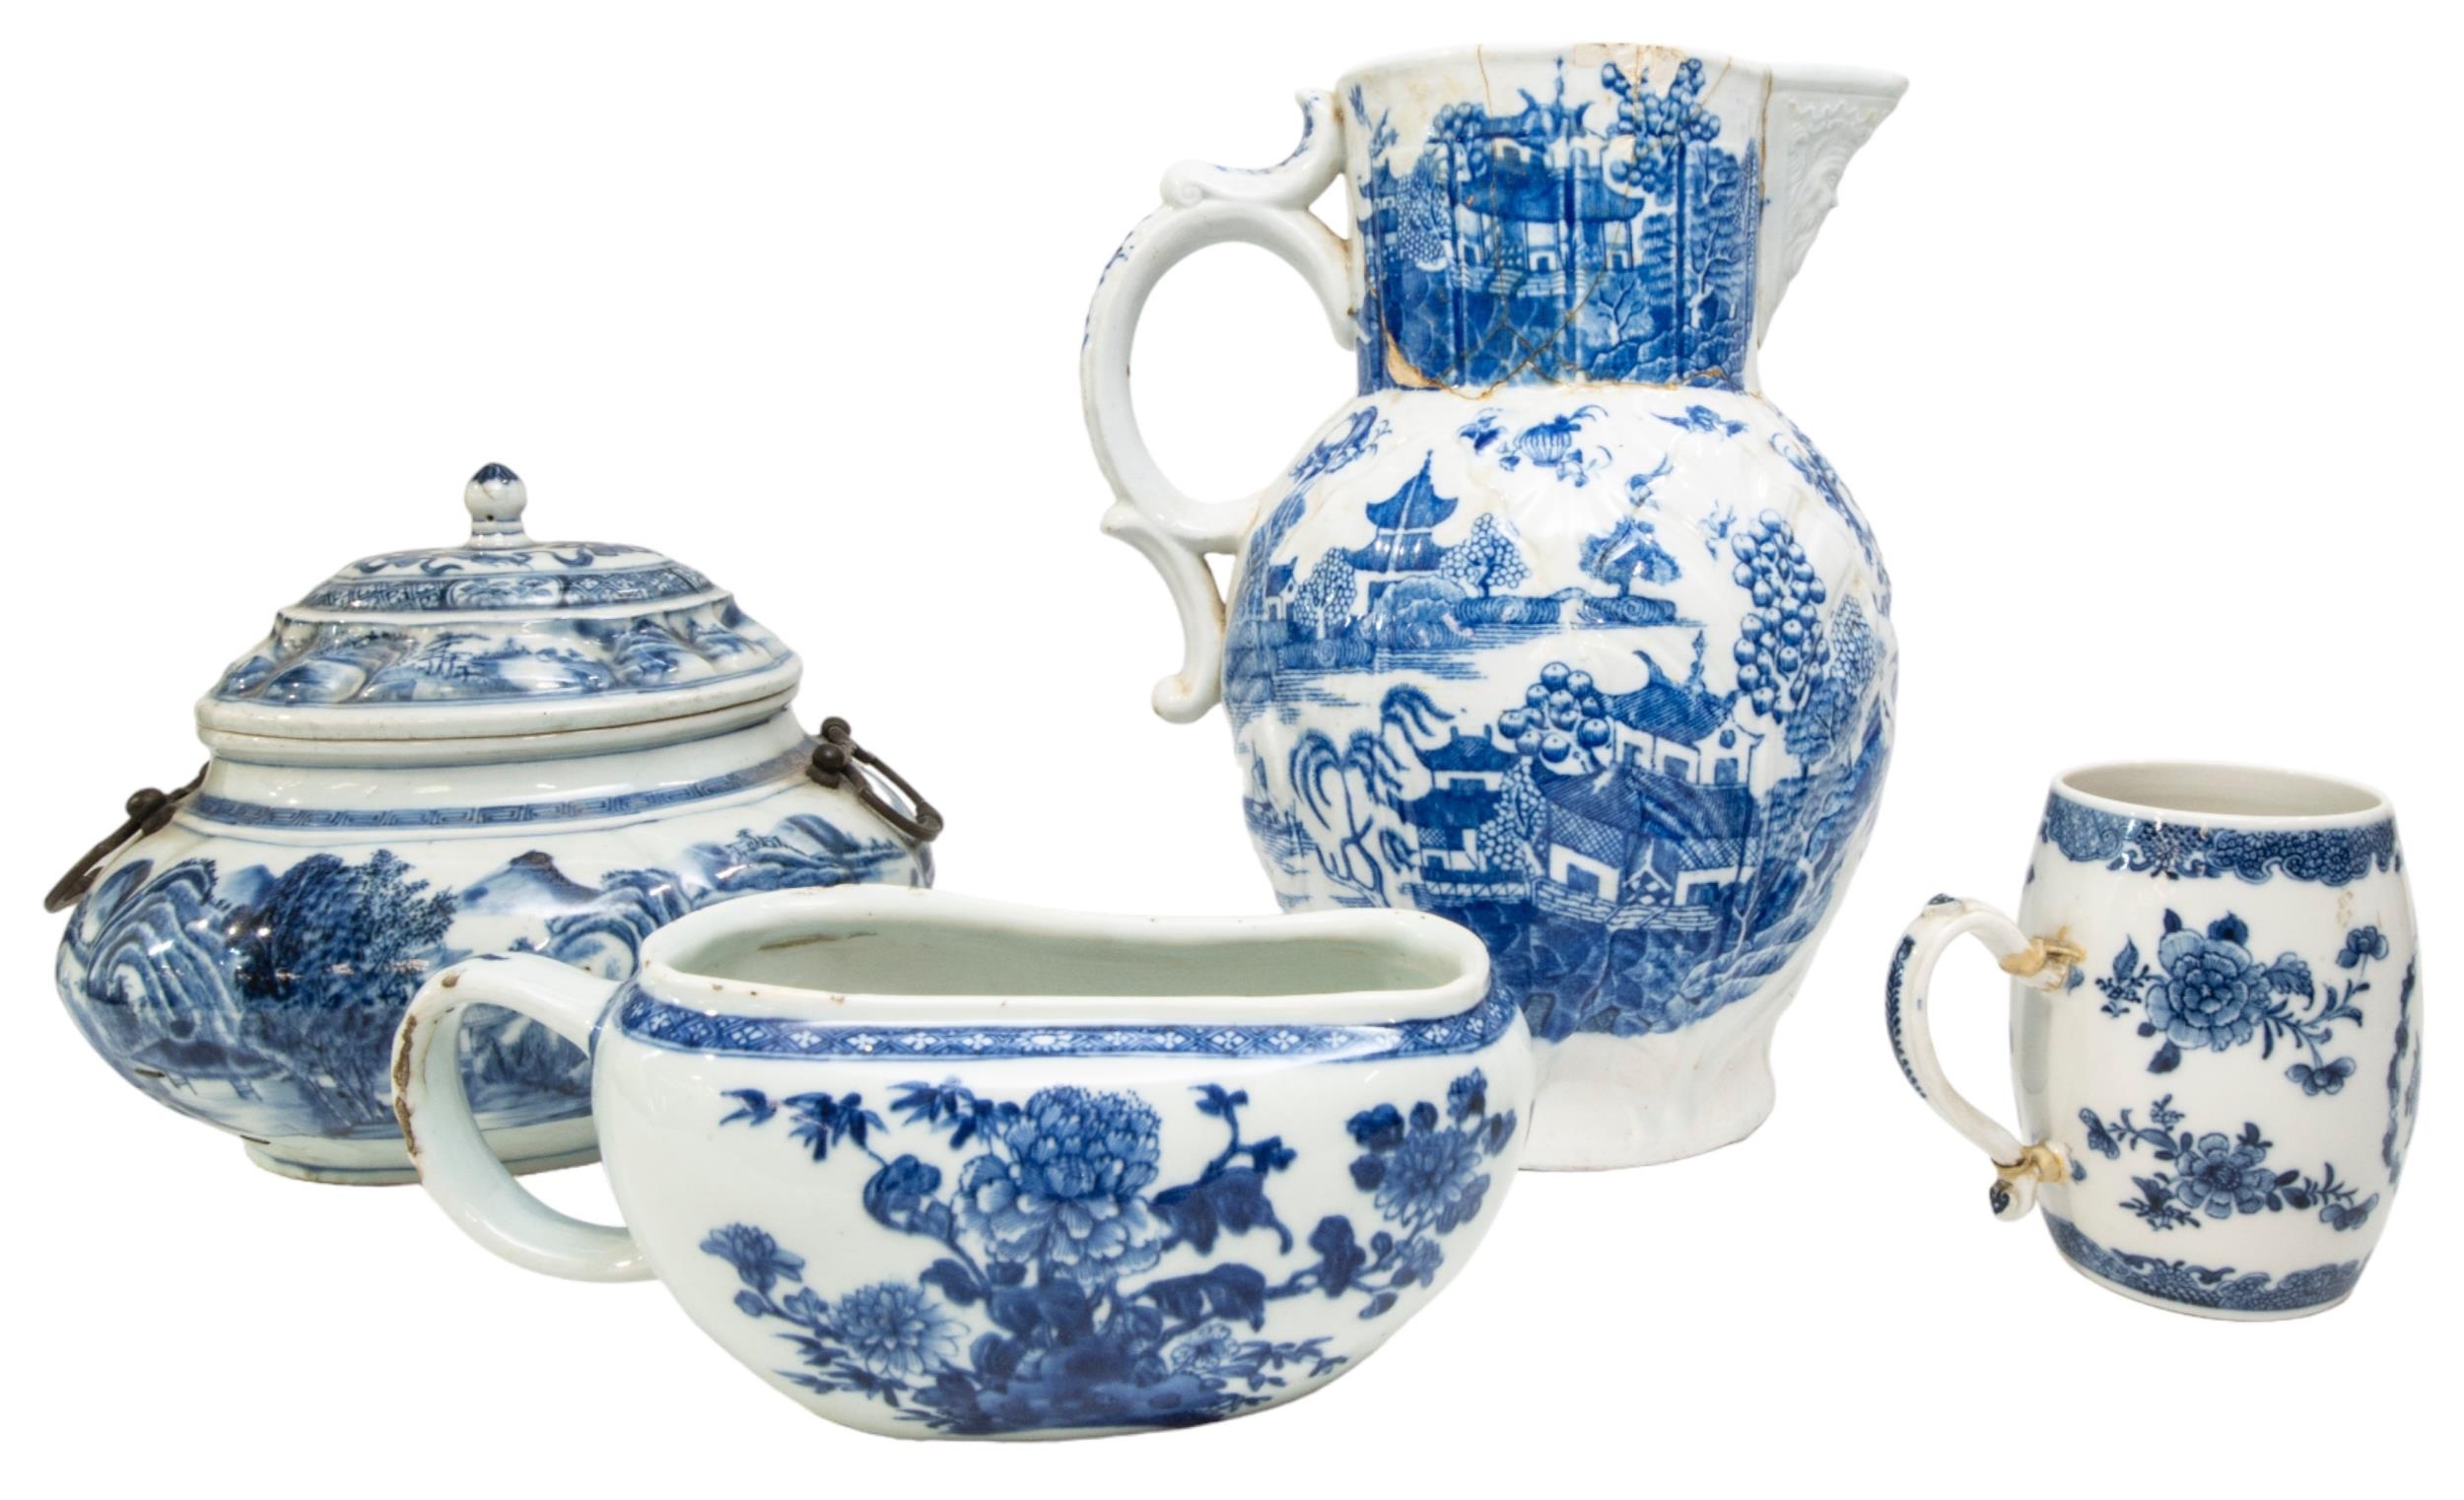 AN 18TH CENTURY CHINESE EXPORT BOURDALOUE, along with a large pitcher with mask form spout, barrel